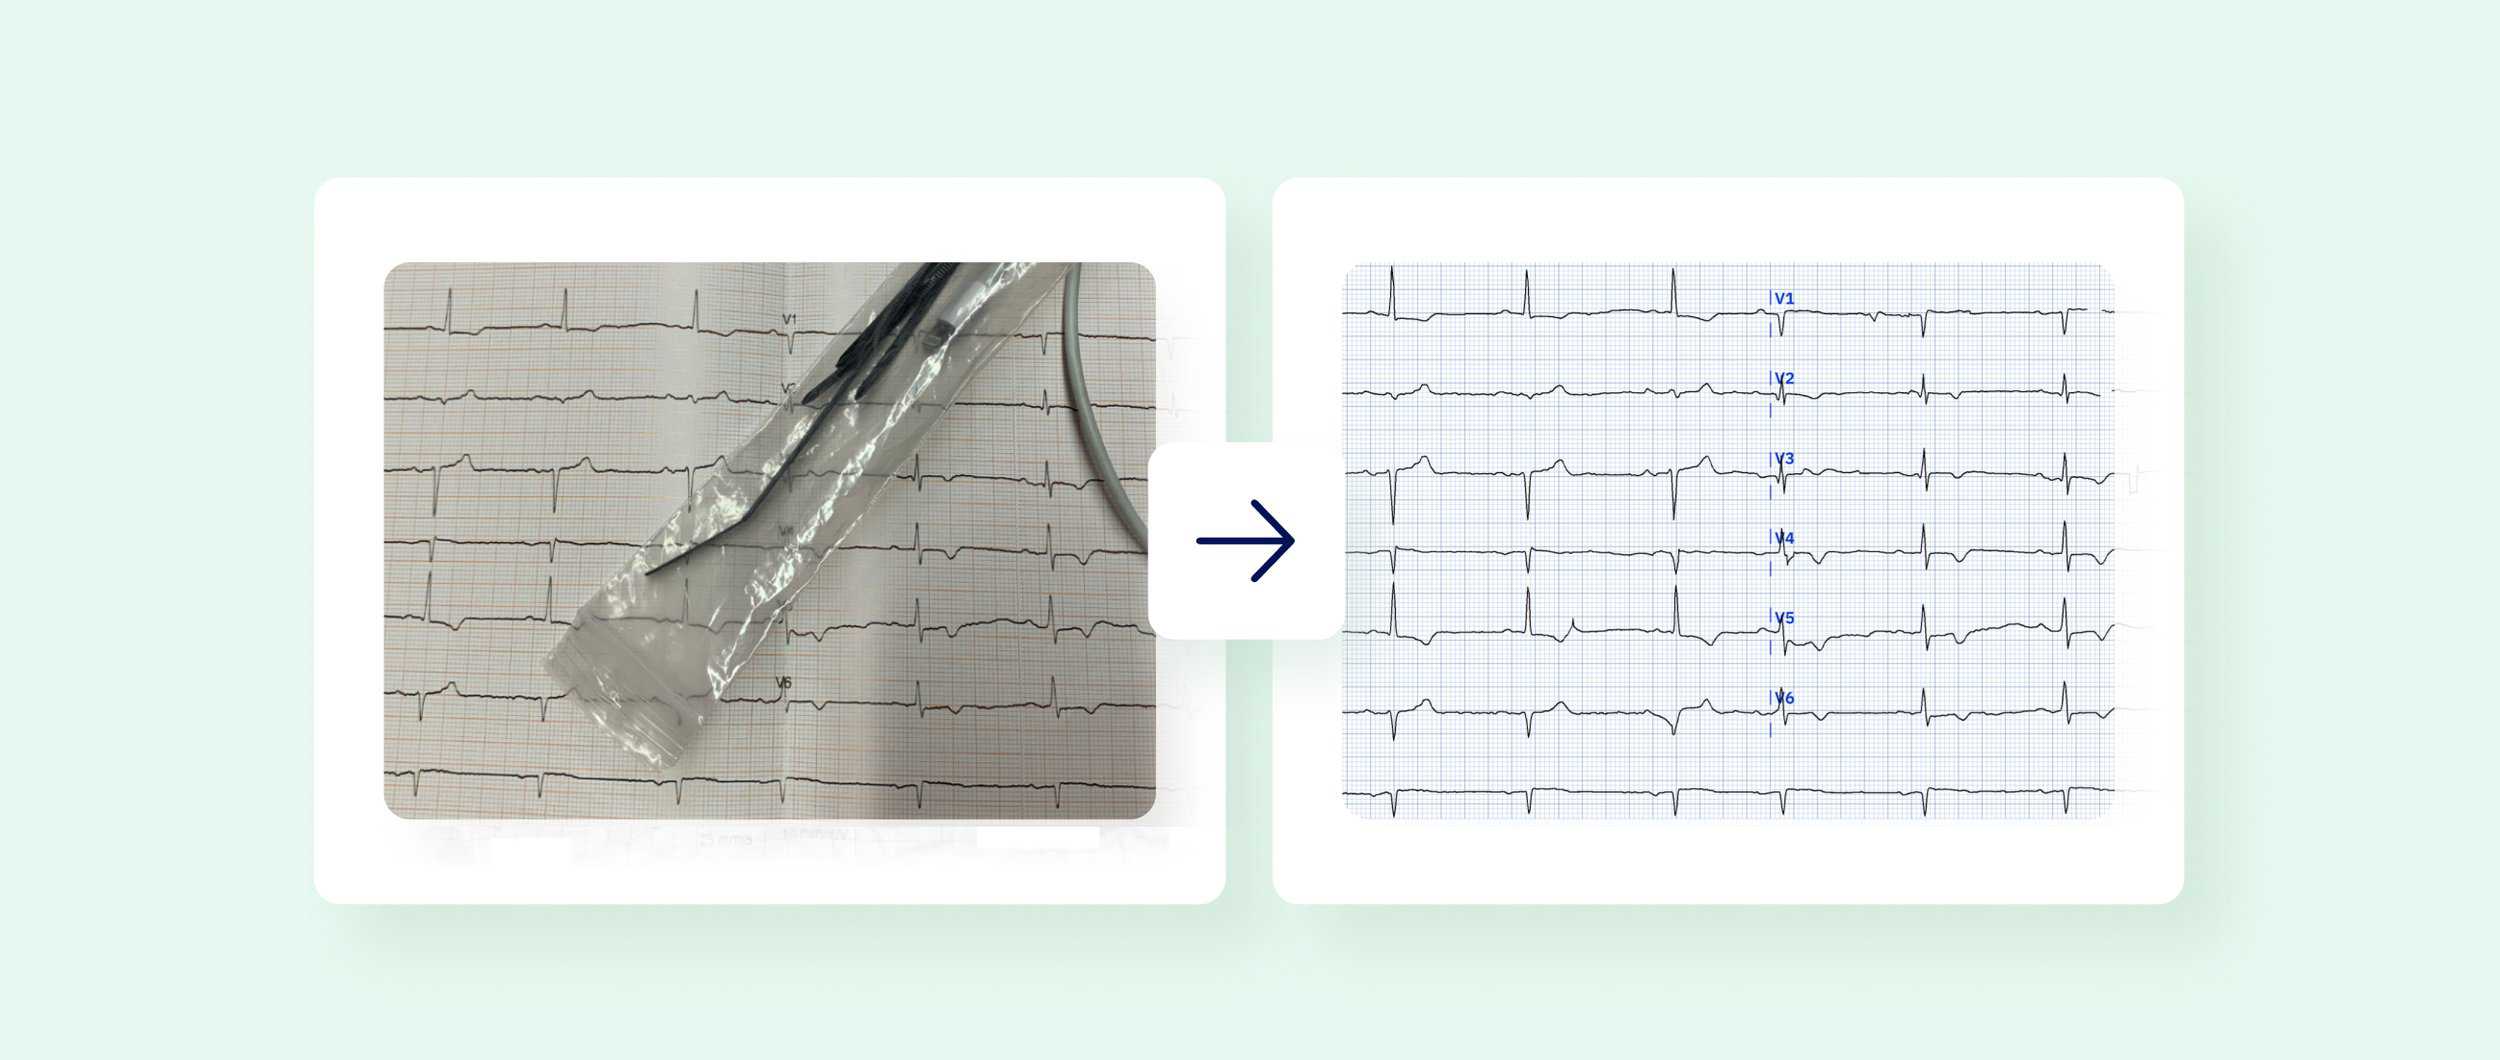 An image of an obstructed, poor-quality ECG and next to it a corrected ECG recording digitized by PMcardio